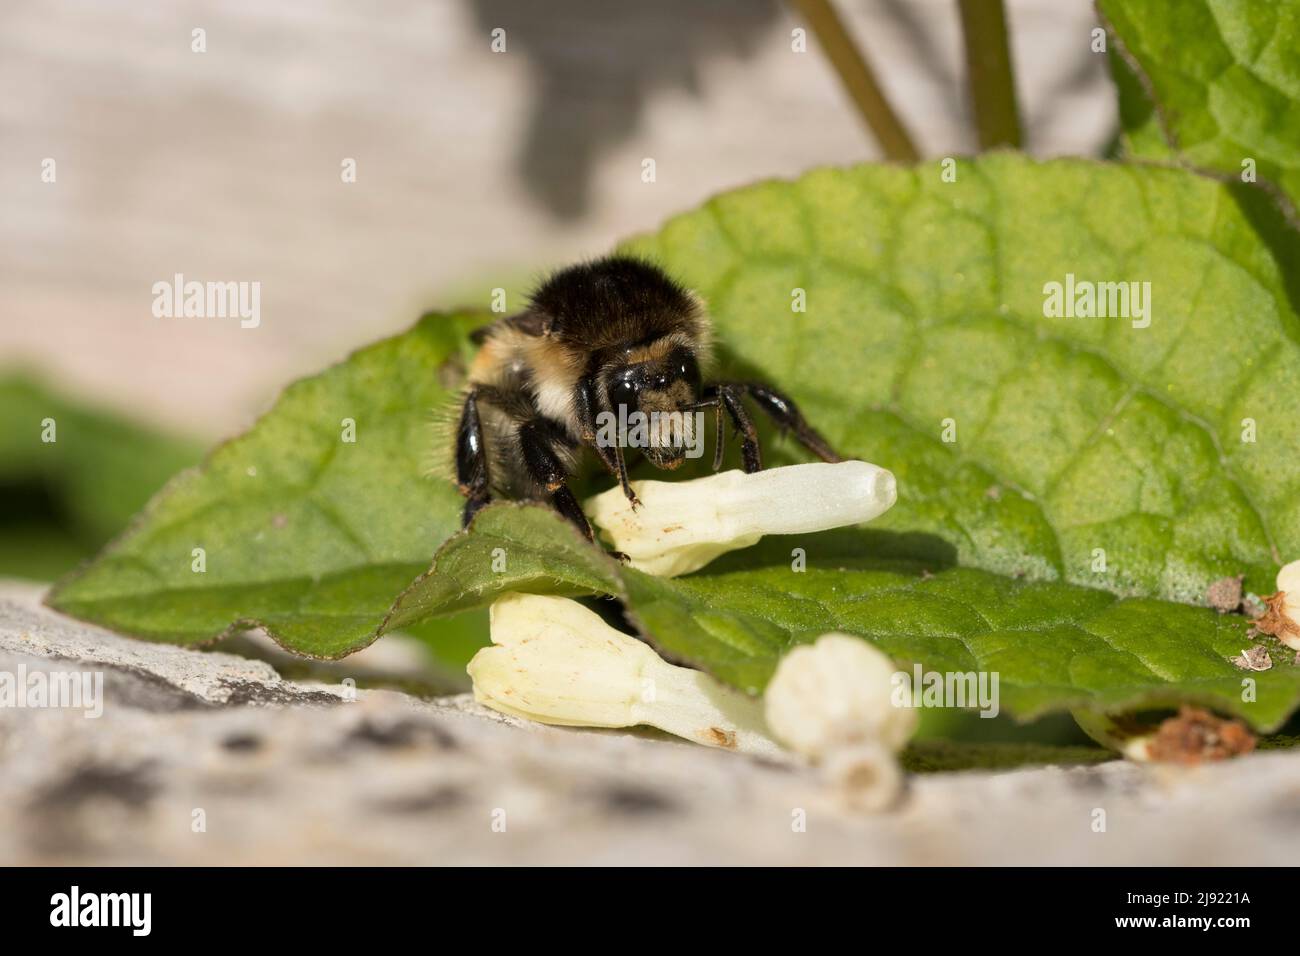 Brown-banded carder bee (Bombus humilis), examining comfrey flowers, Canton Solothurn, Switzerland Stock Photo